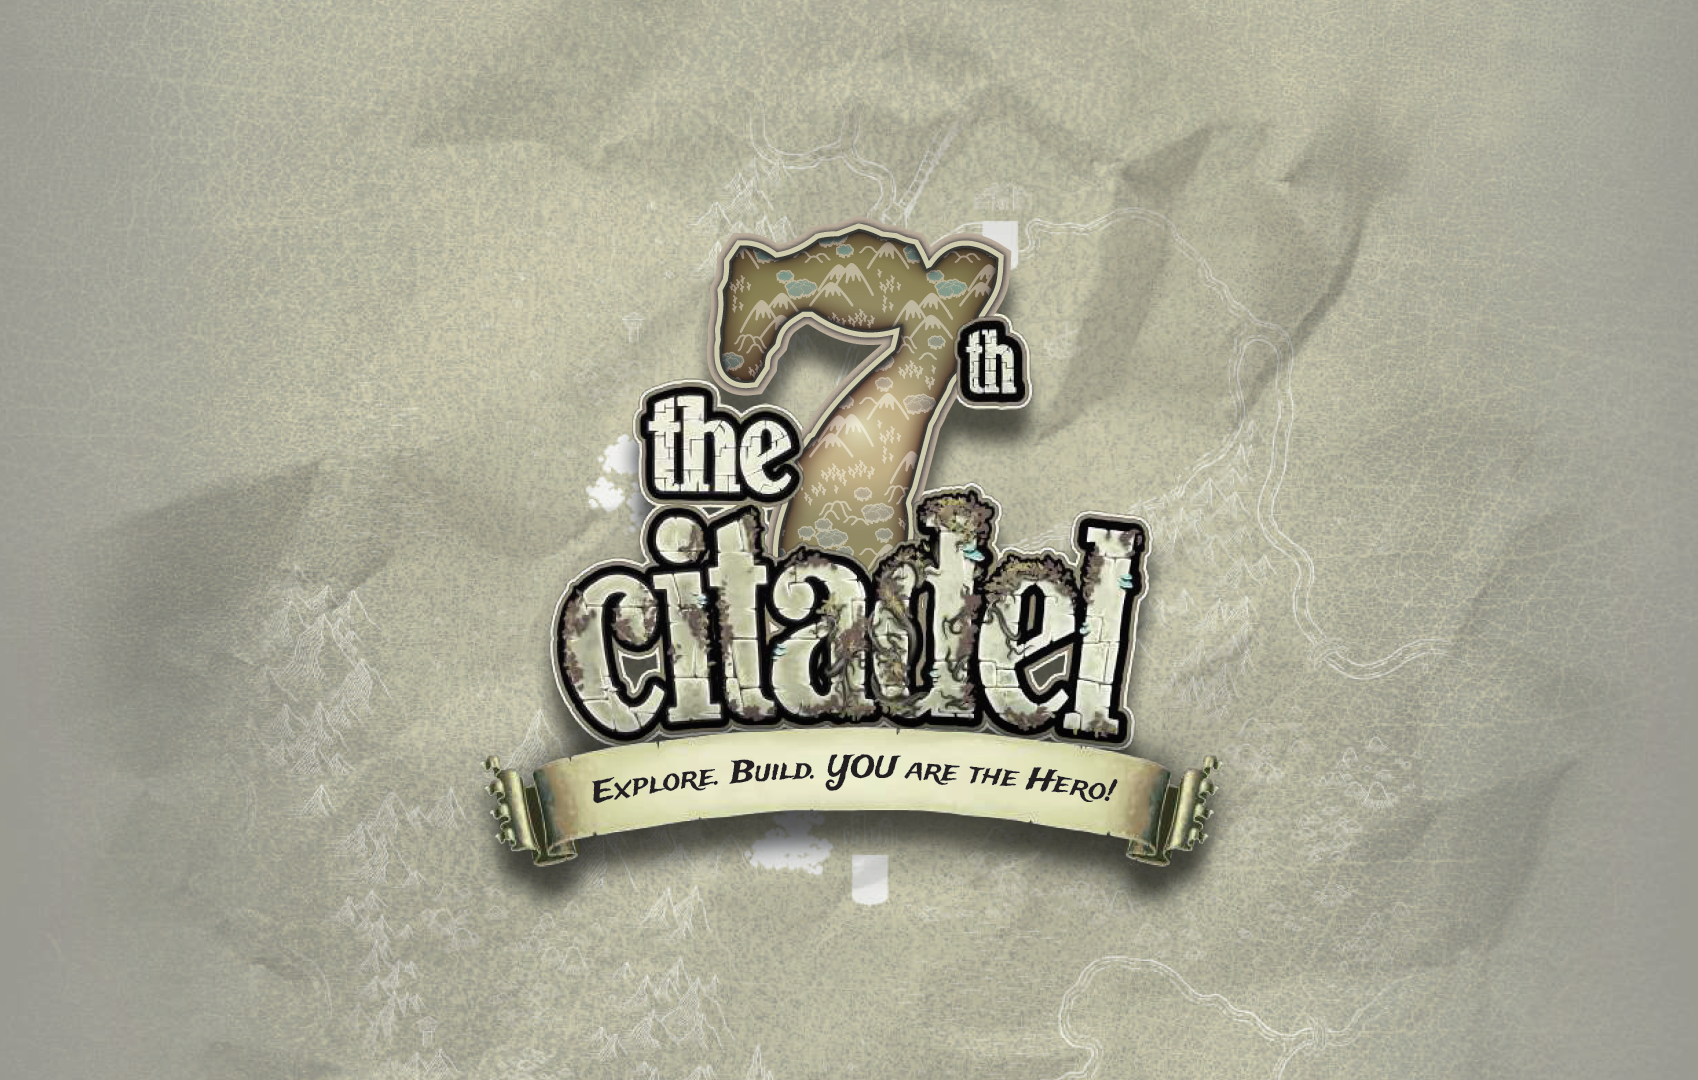 THE 7th CITADEL - Explore. Build. YOU are the hero! by Serious